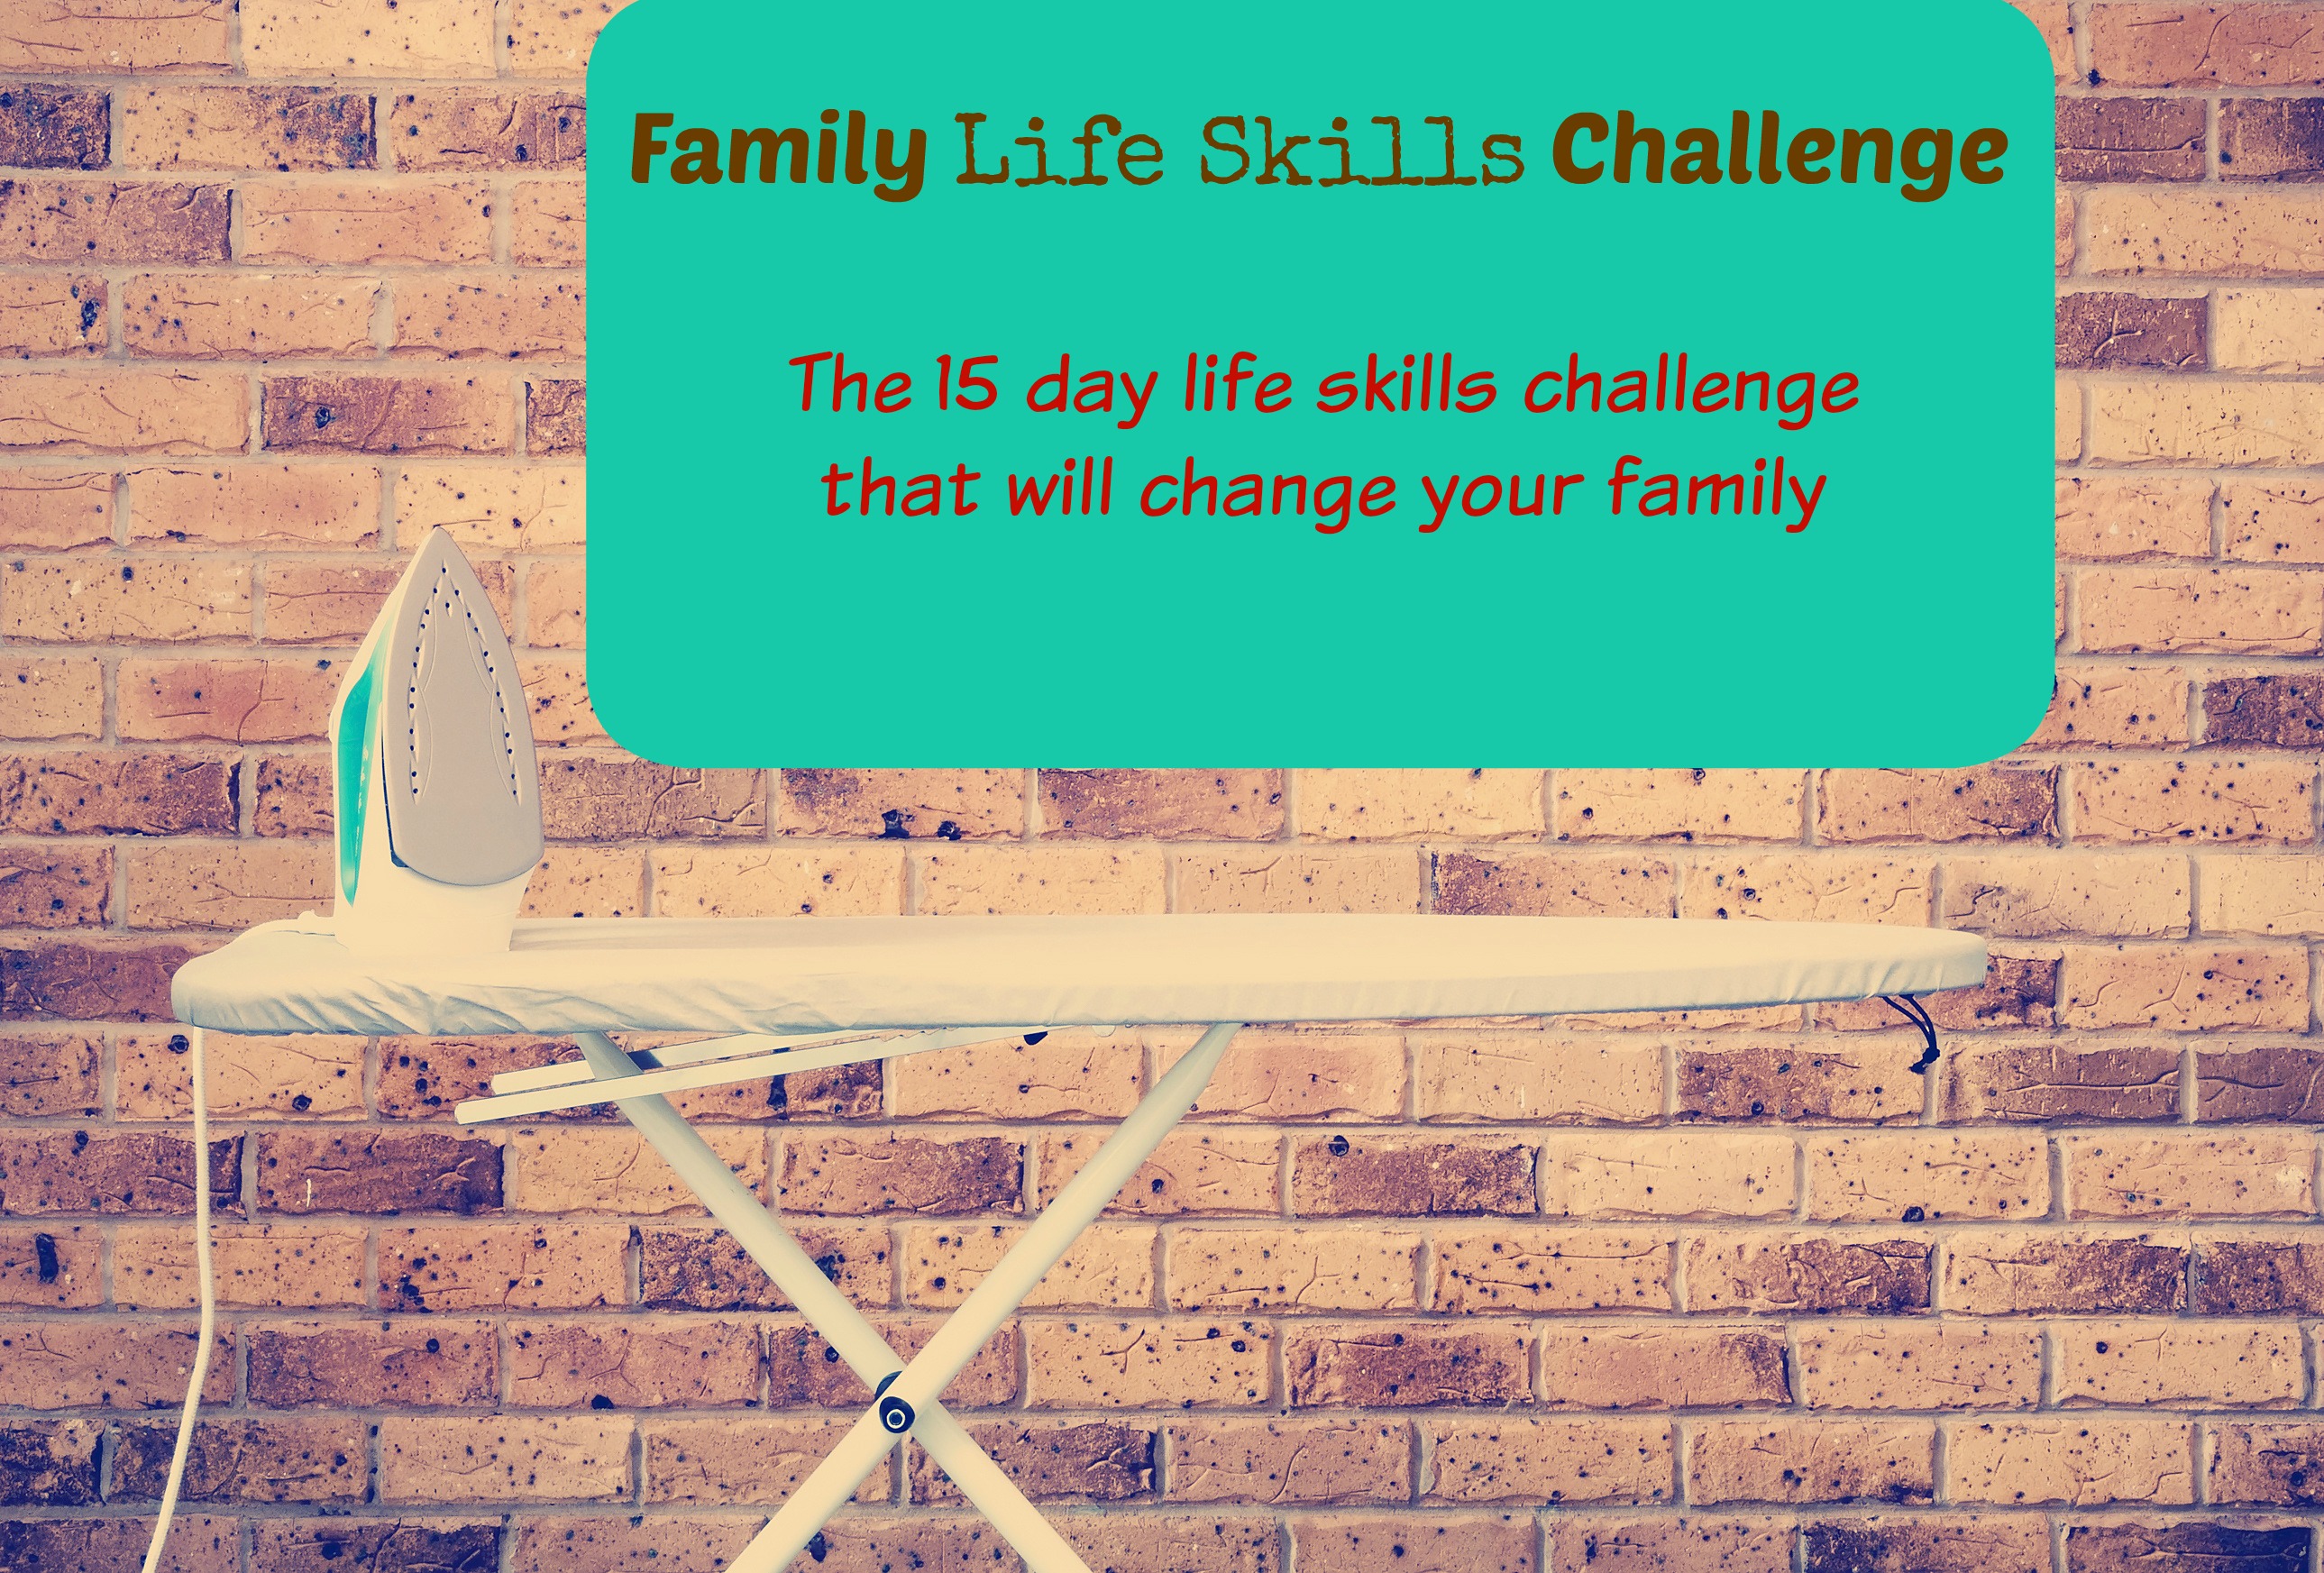 The 15 day life skills challenge that will change your family